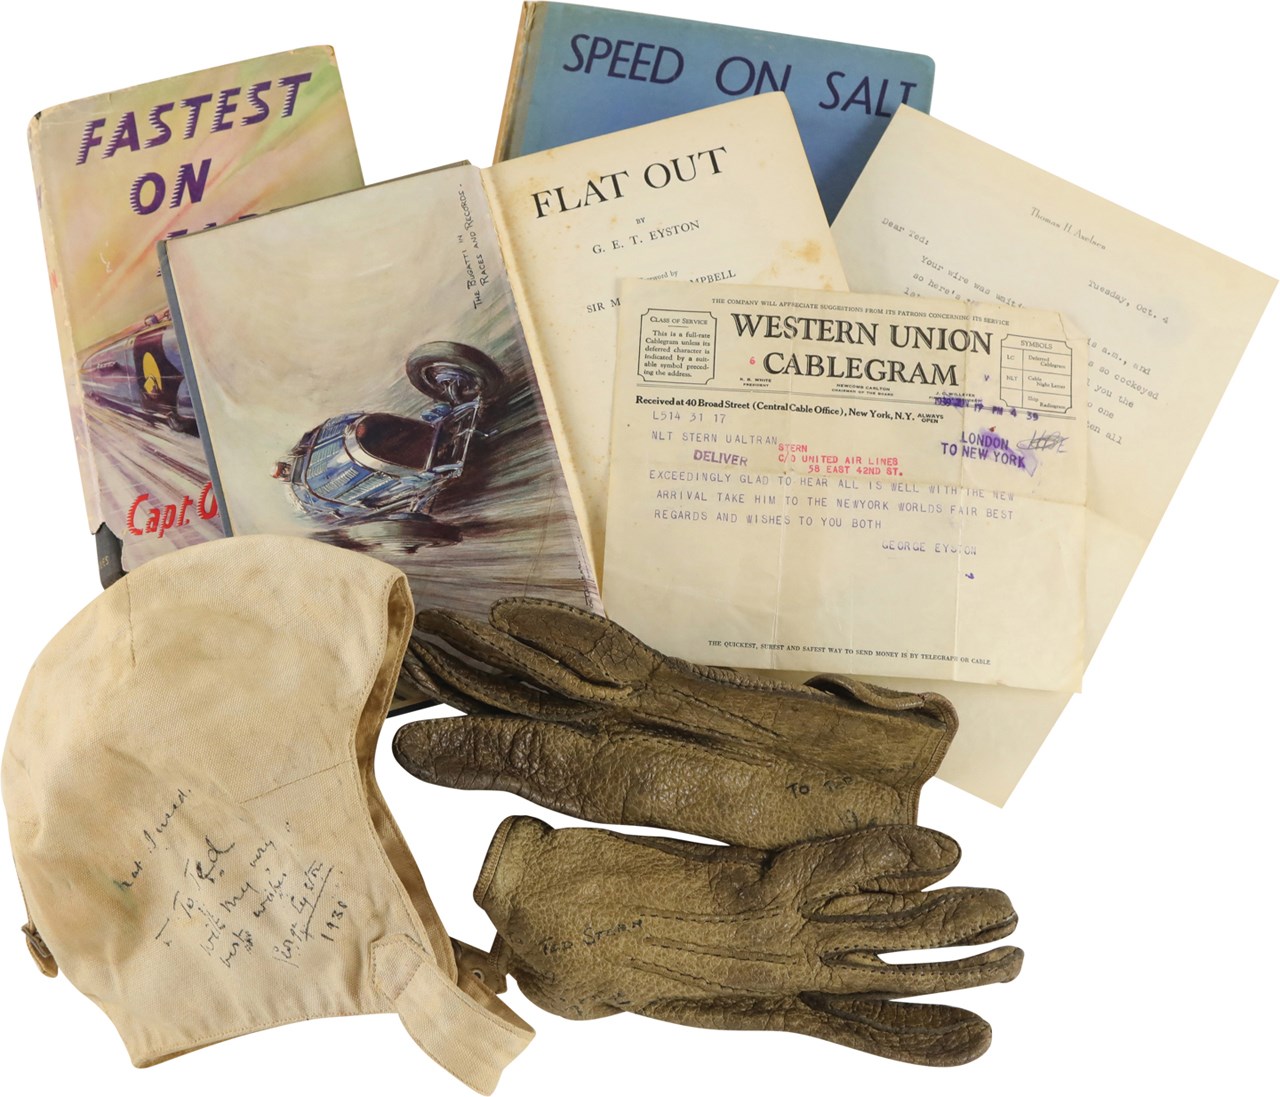 - George Eyston Race Worn Gloves and Canvas Helmet Signed to His Public Relations Rep - Land Speed Record Pioneer